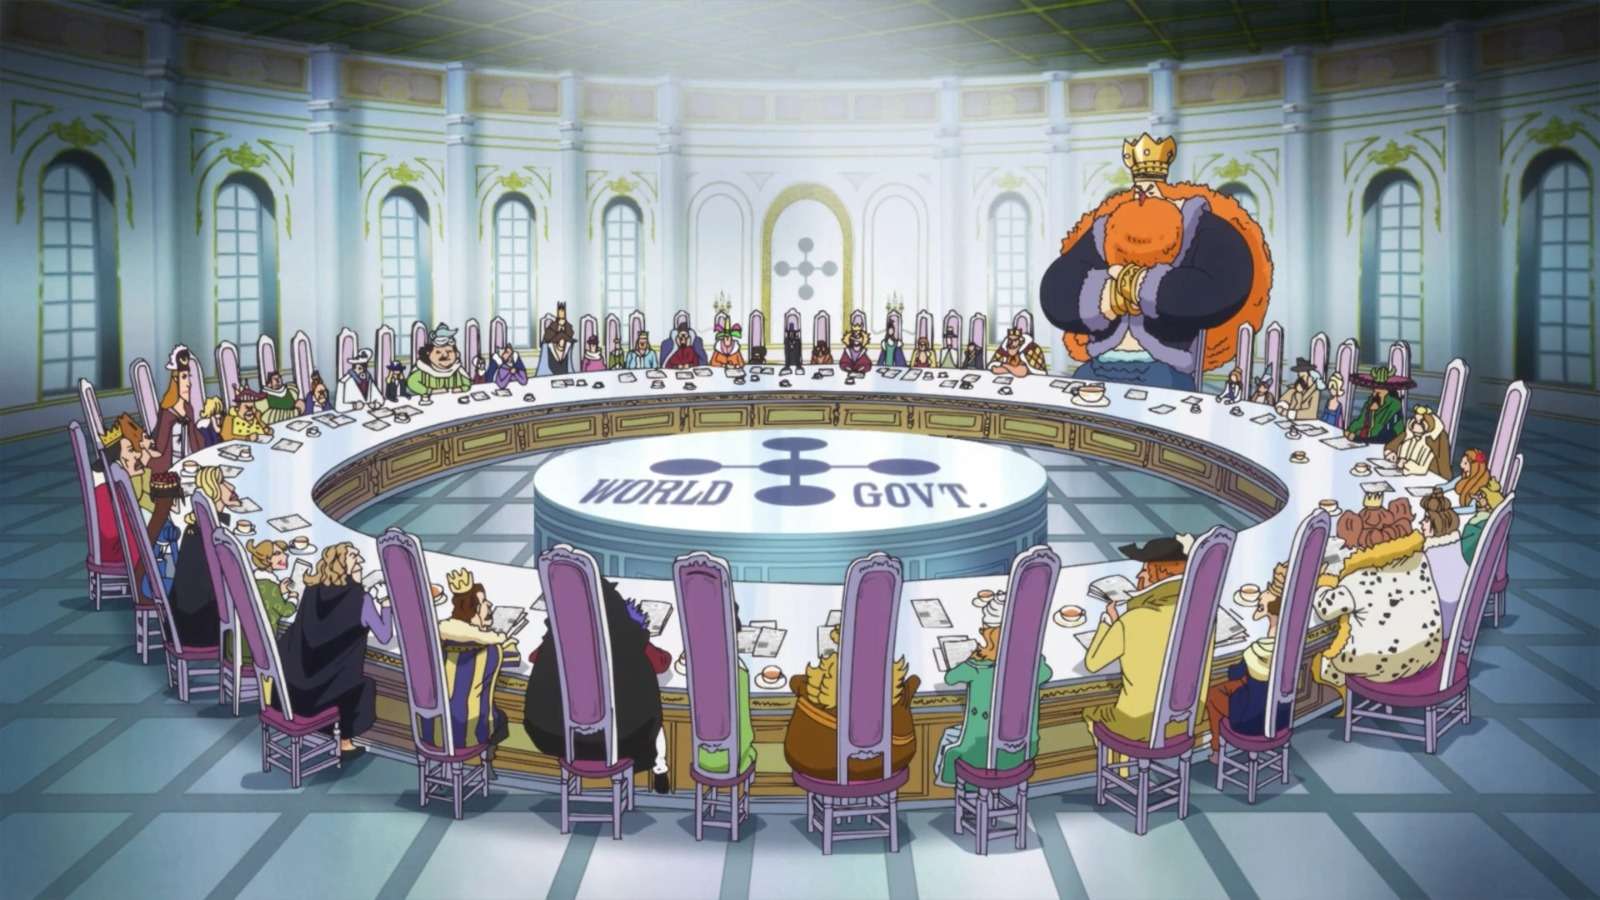 An image of One Piece's Reverie flashback